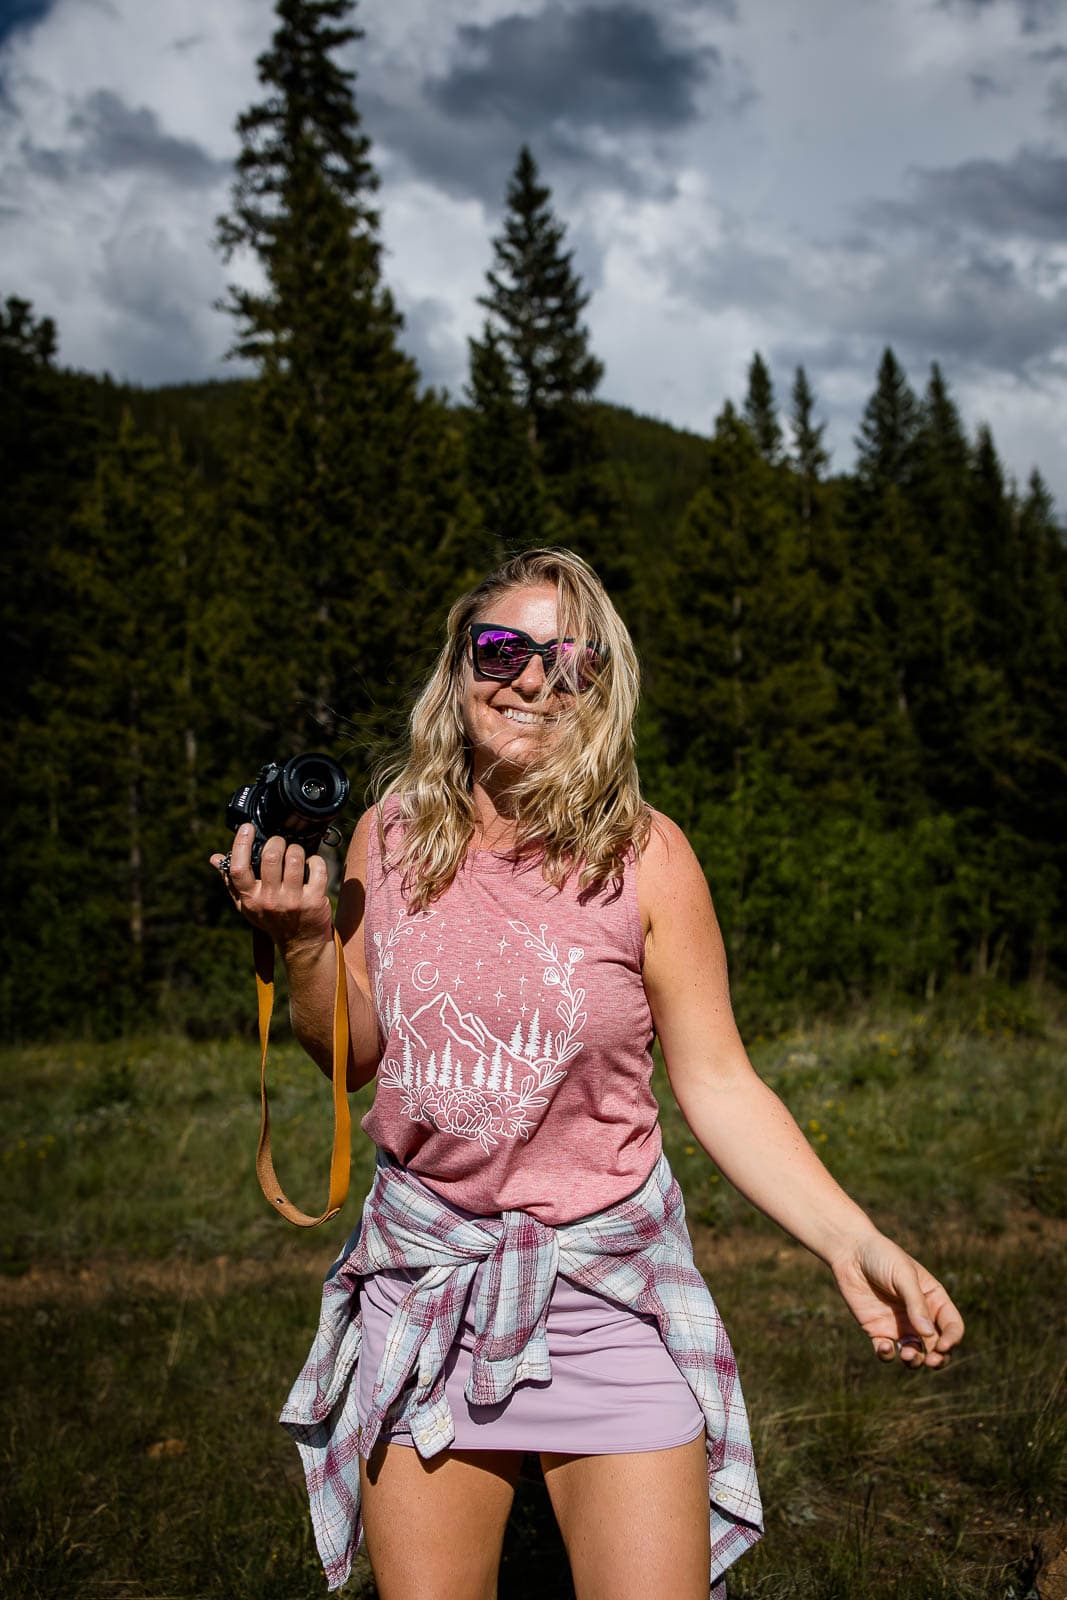 adventure elopement and mountain wedding photographer in Colorado, Nat Moore Photography, walks towards the camera